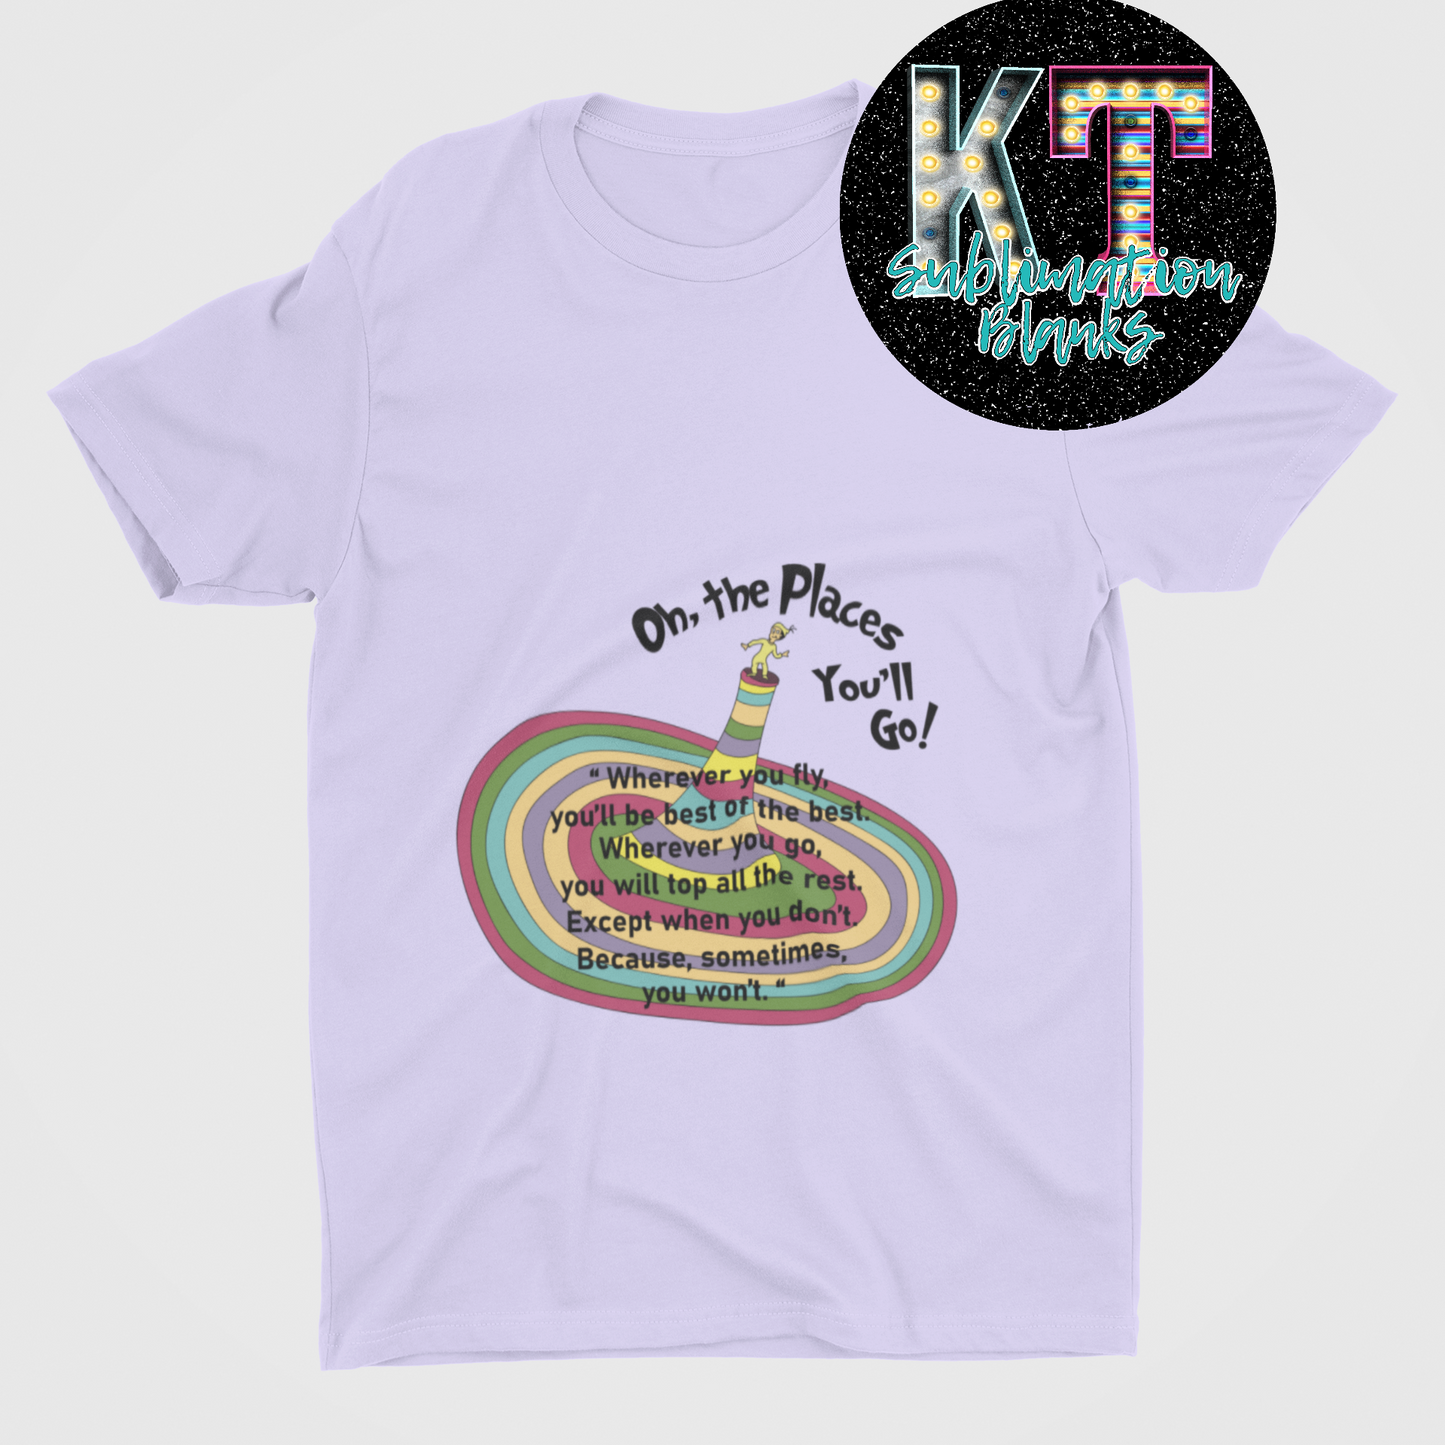 Oh the Places you'll go Unisex T-shirt